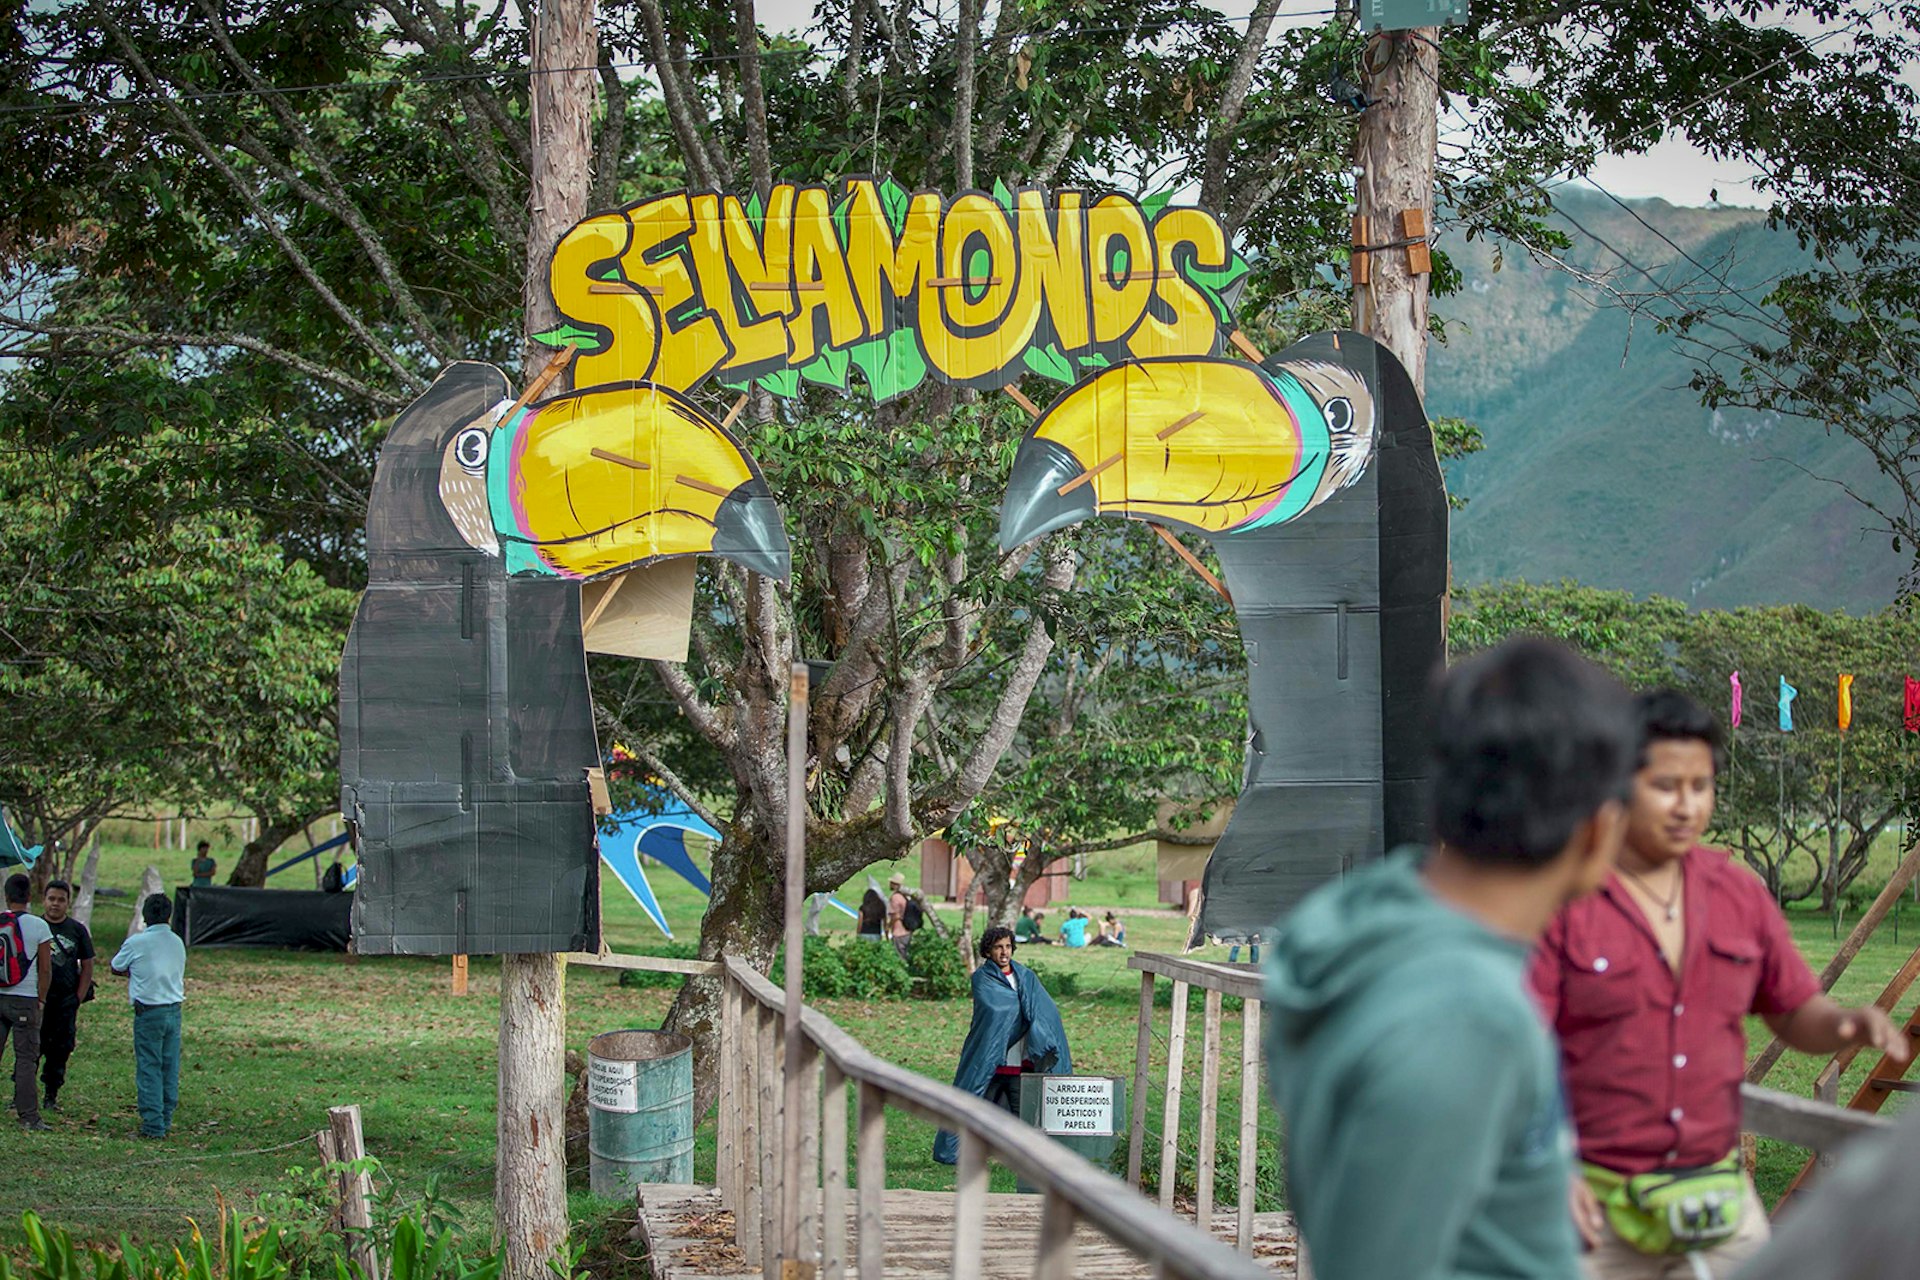 A small wooden fridge leads to a bright yellow sign that says "Selvamonos" © Erick Andía / Lonely Planet